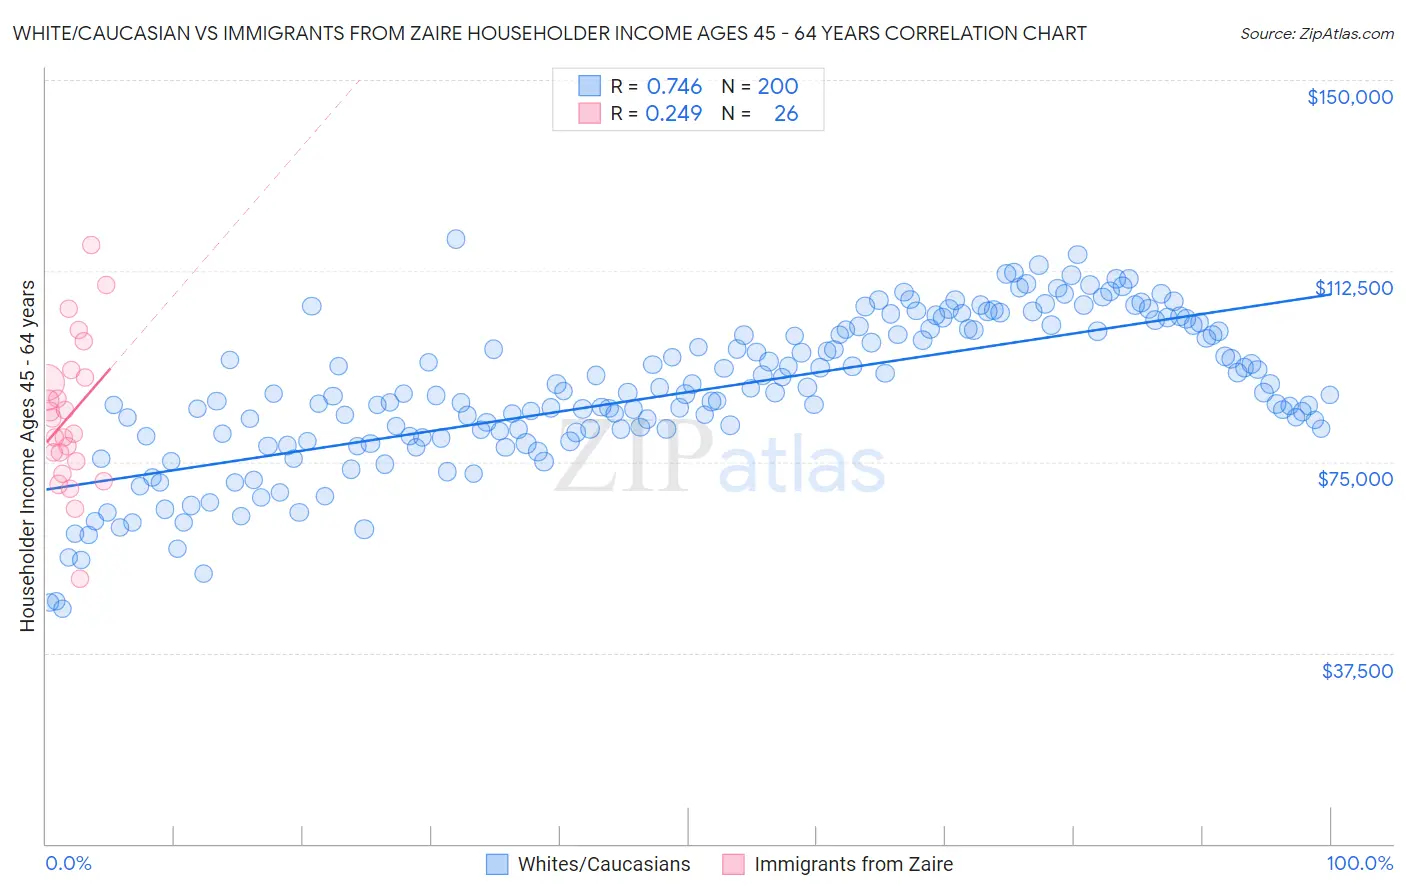 White/Caucasian vs Immigrants from Zaire Householder Income Ages 45 - 64 years